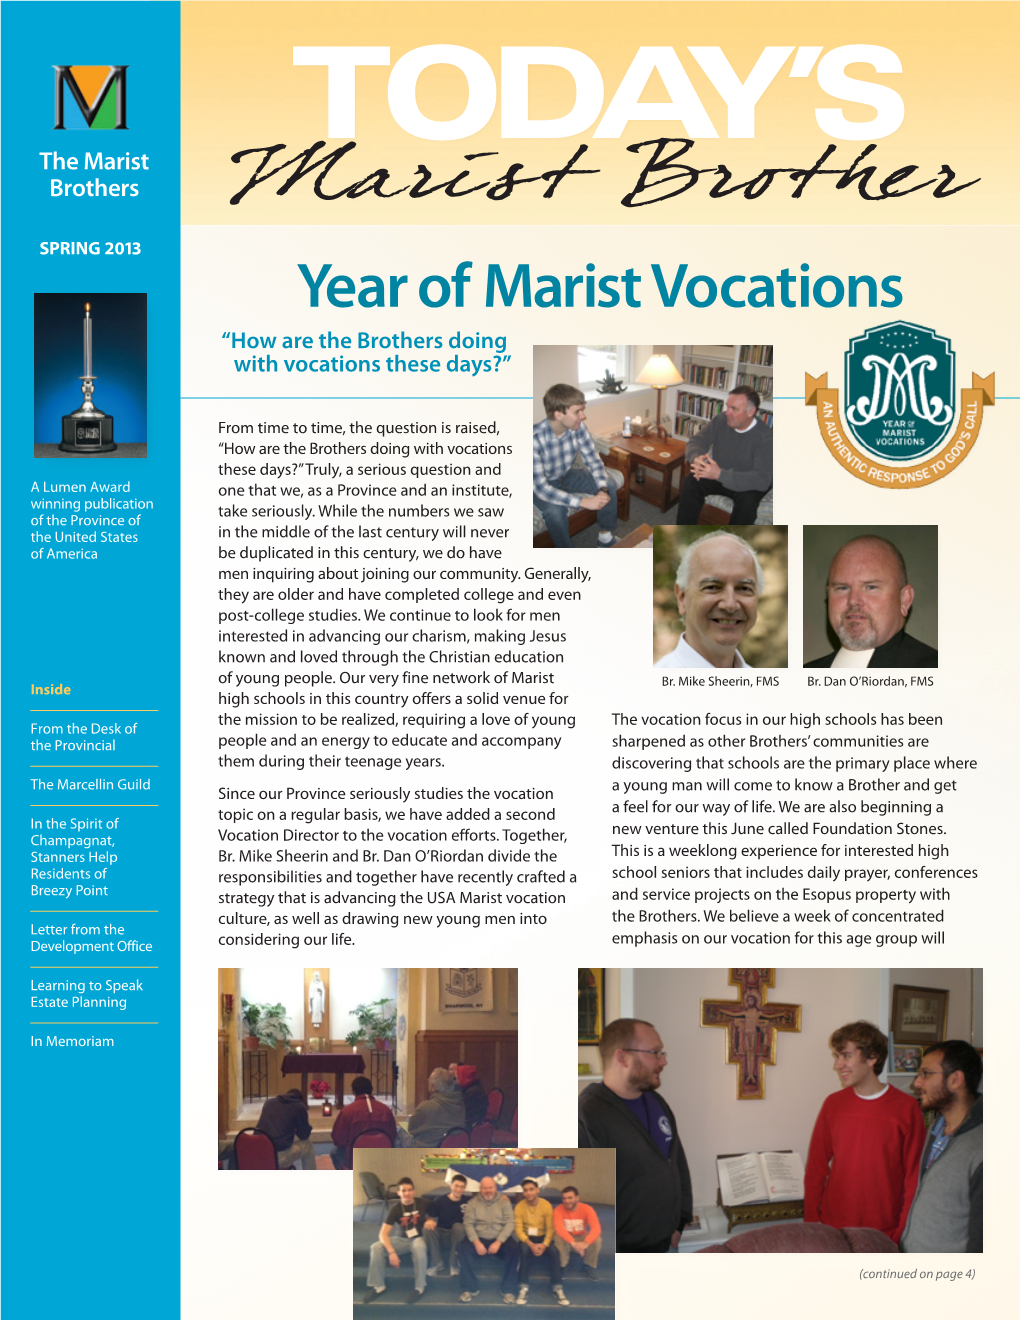 Marist Brothers Marist Brother SPRING 2013 Year of Marist Vocations “How Are the Brothers Doing with Vocations These Days?”